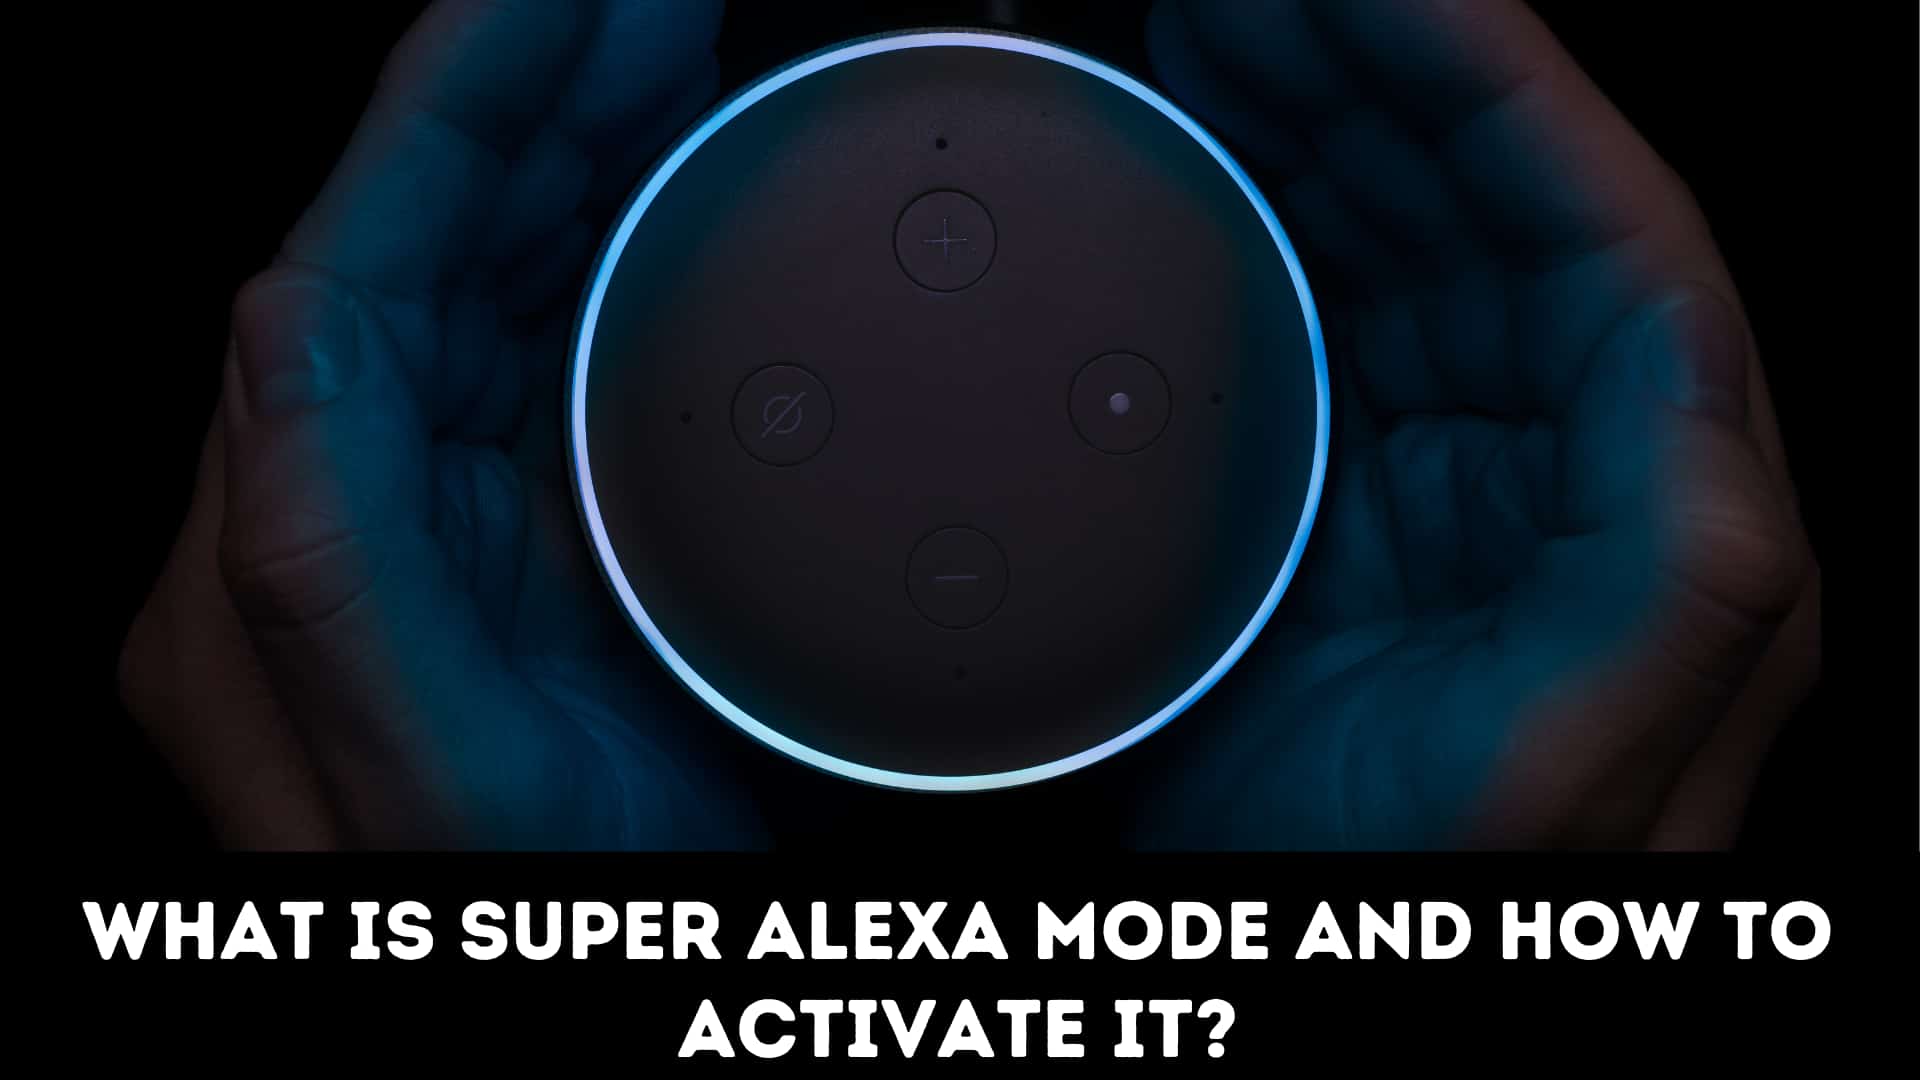 What Is Super Alexa Mode And How To Activate It?,hidden secret codes here in Alexa